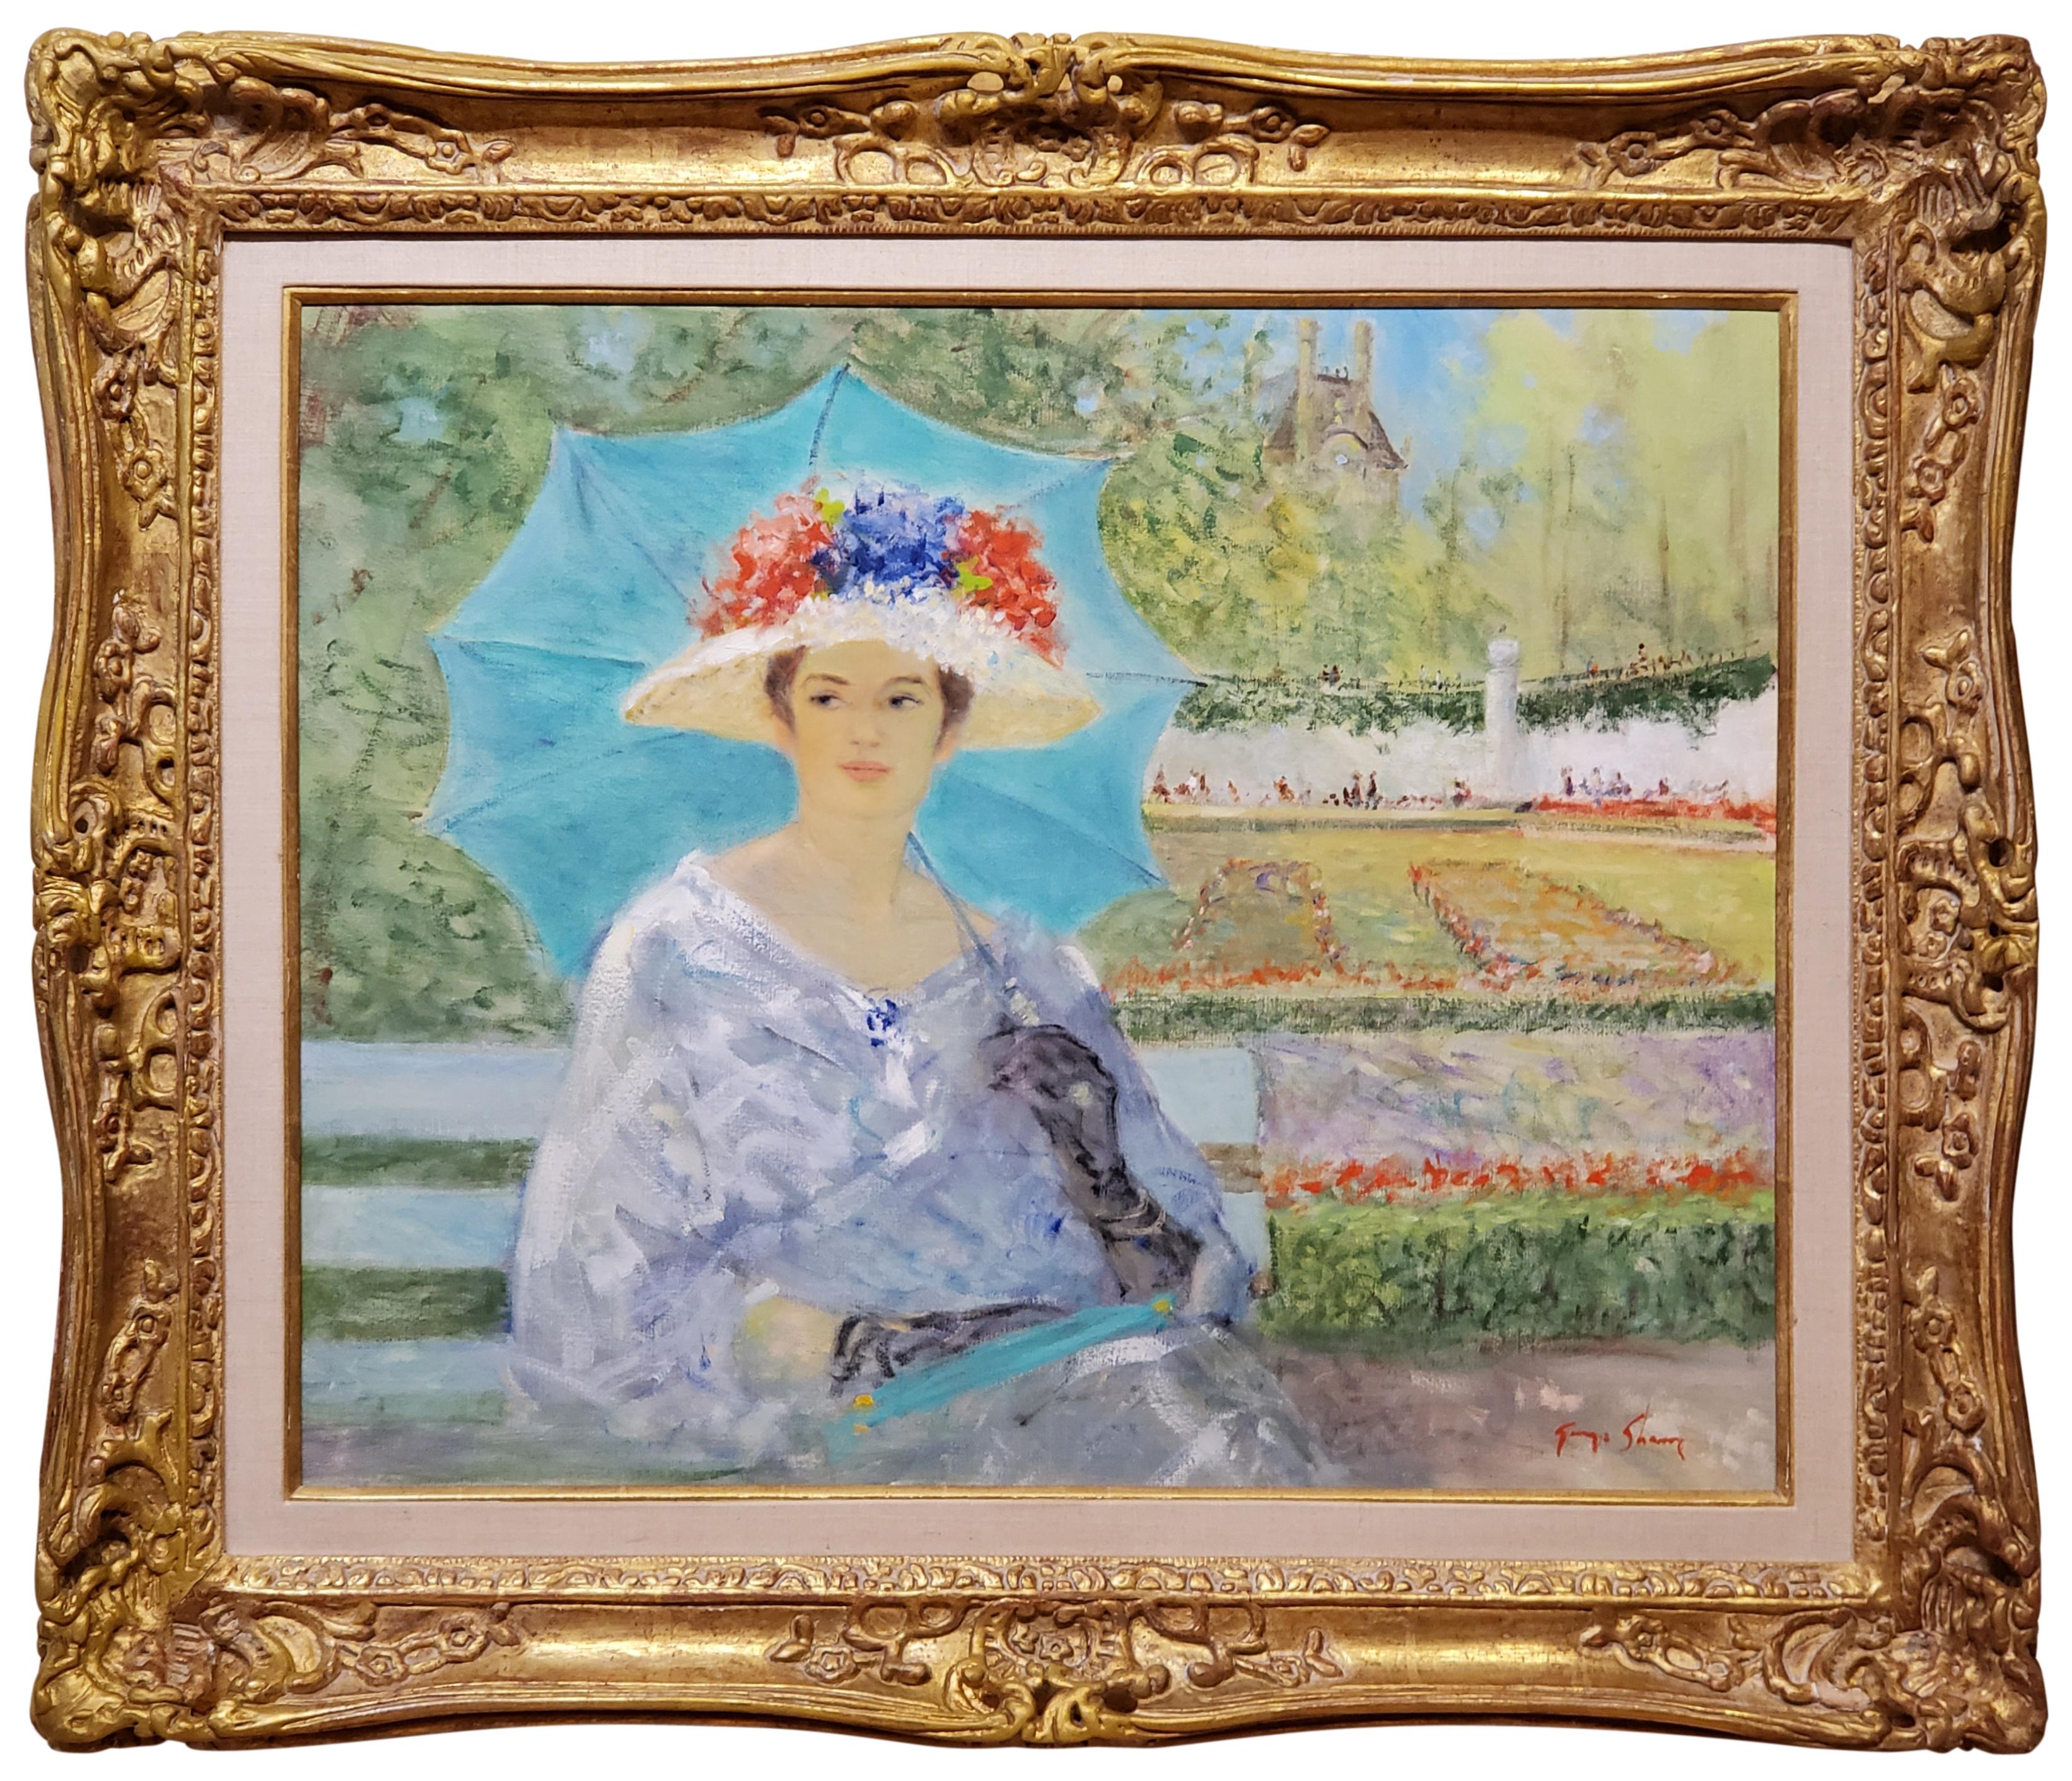 Apres-Midi en Ete, Paris. Elegant Woman enjoying an Afternoon in Paris.

This portrait is oil on canvas and measures 23.5" tall by 30" wide.

This impressionist oil painting measures 34" tall by 40" wide in the frame.

George Shawe was an American